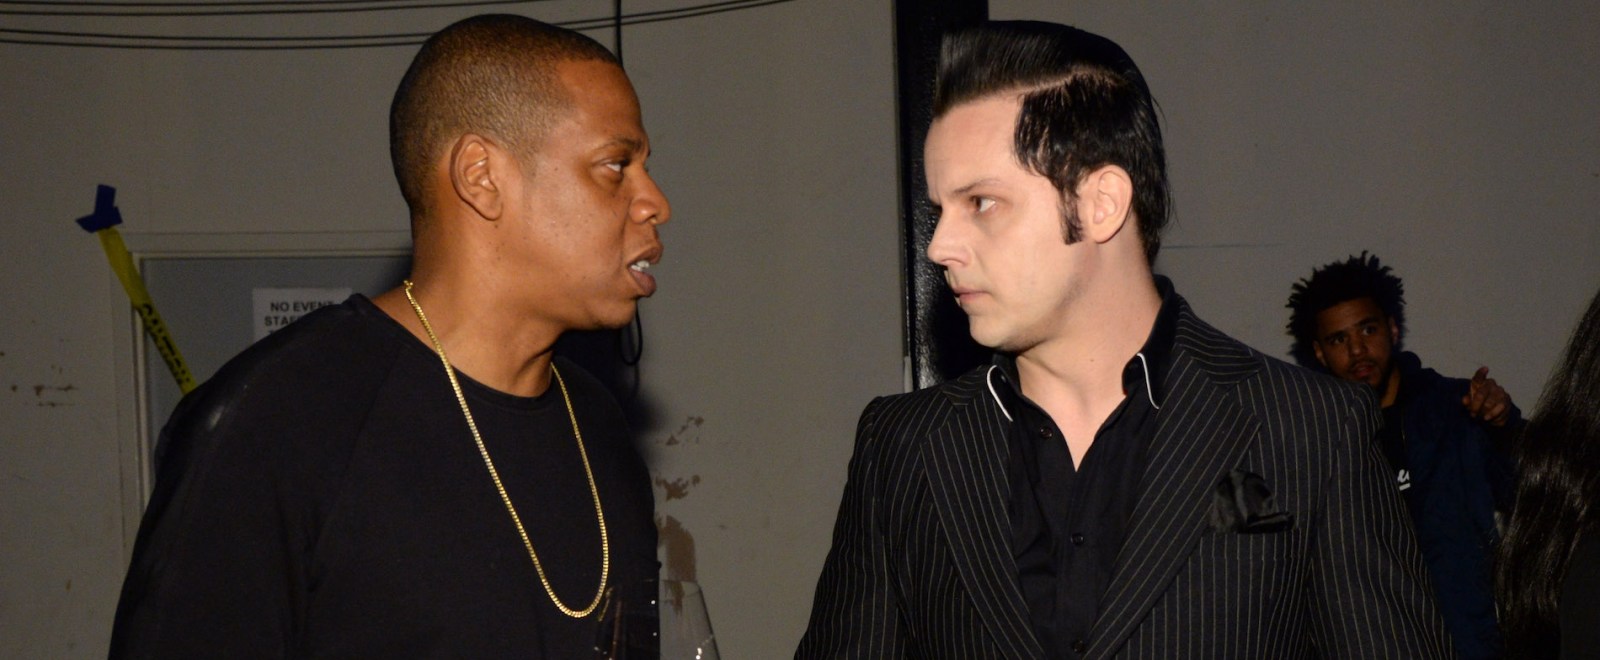 Jay-Z Jack White Tidal launch event 2015